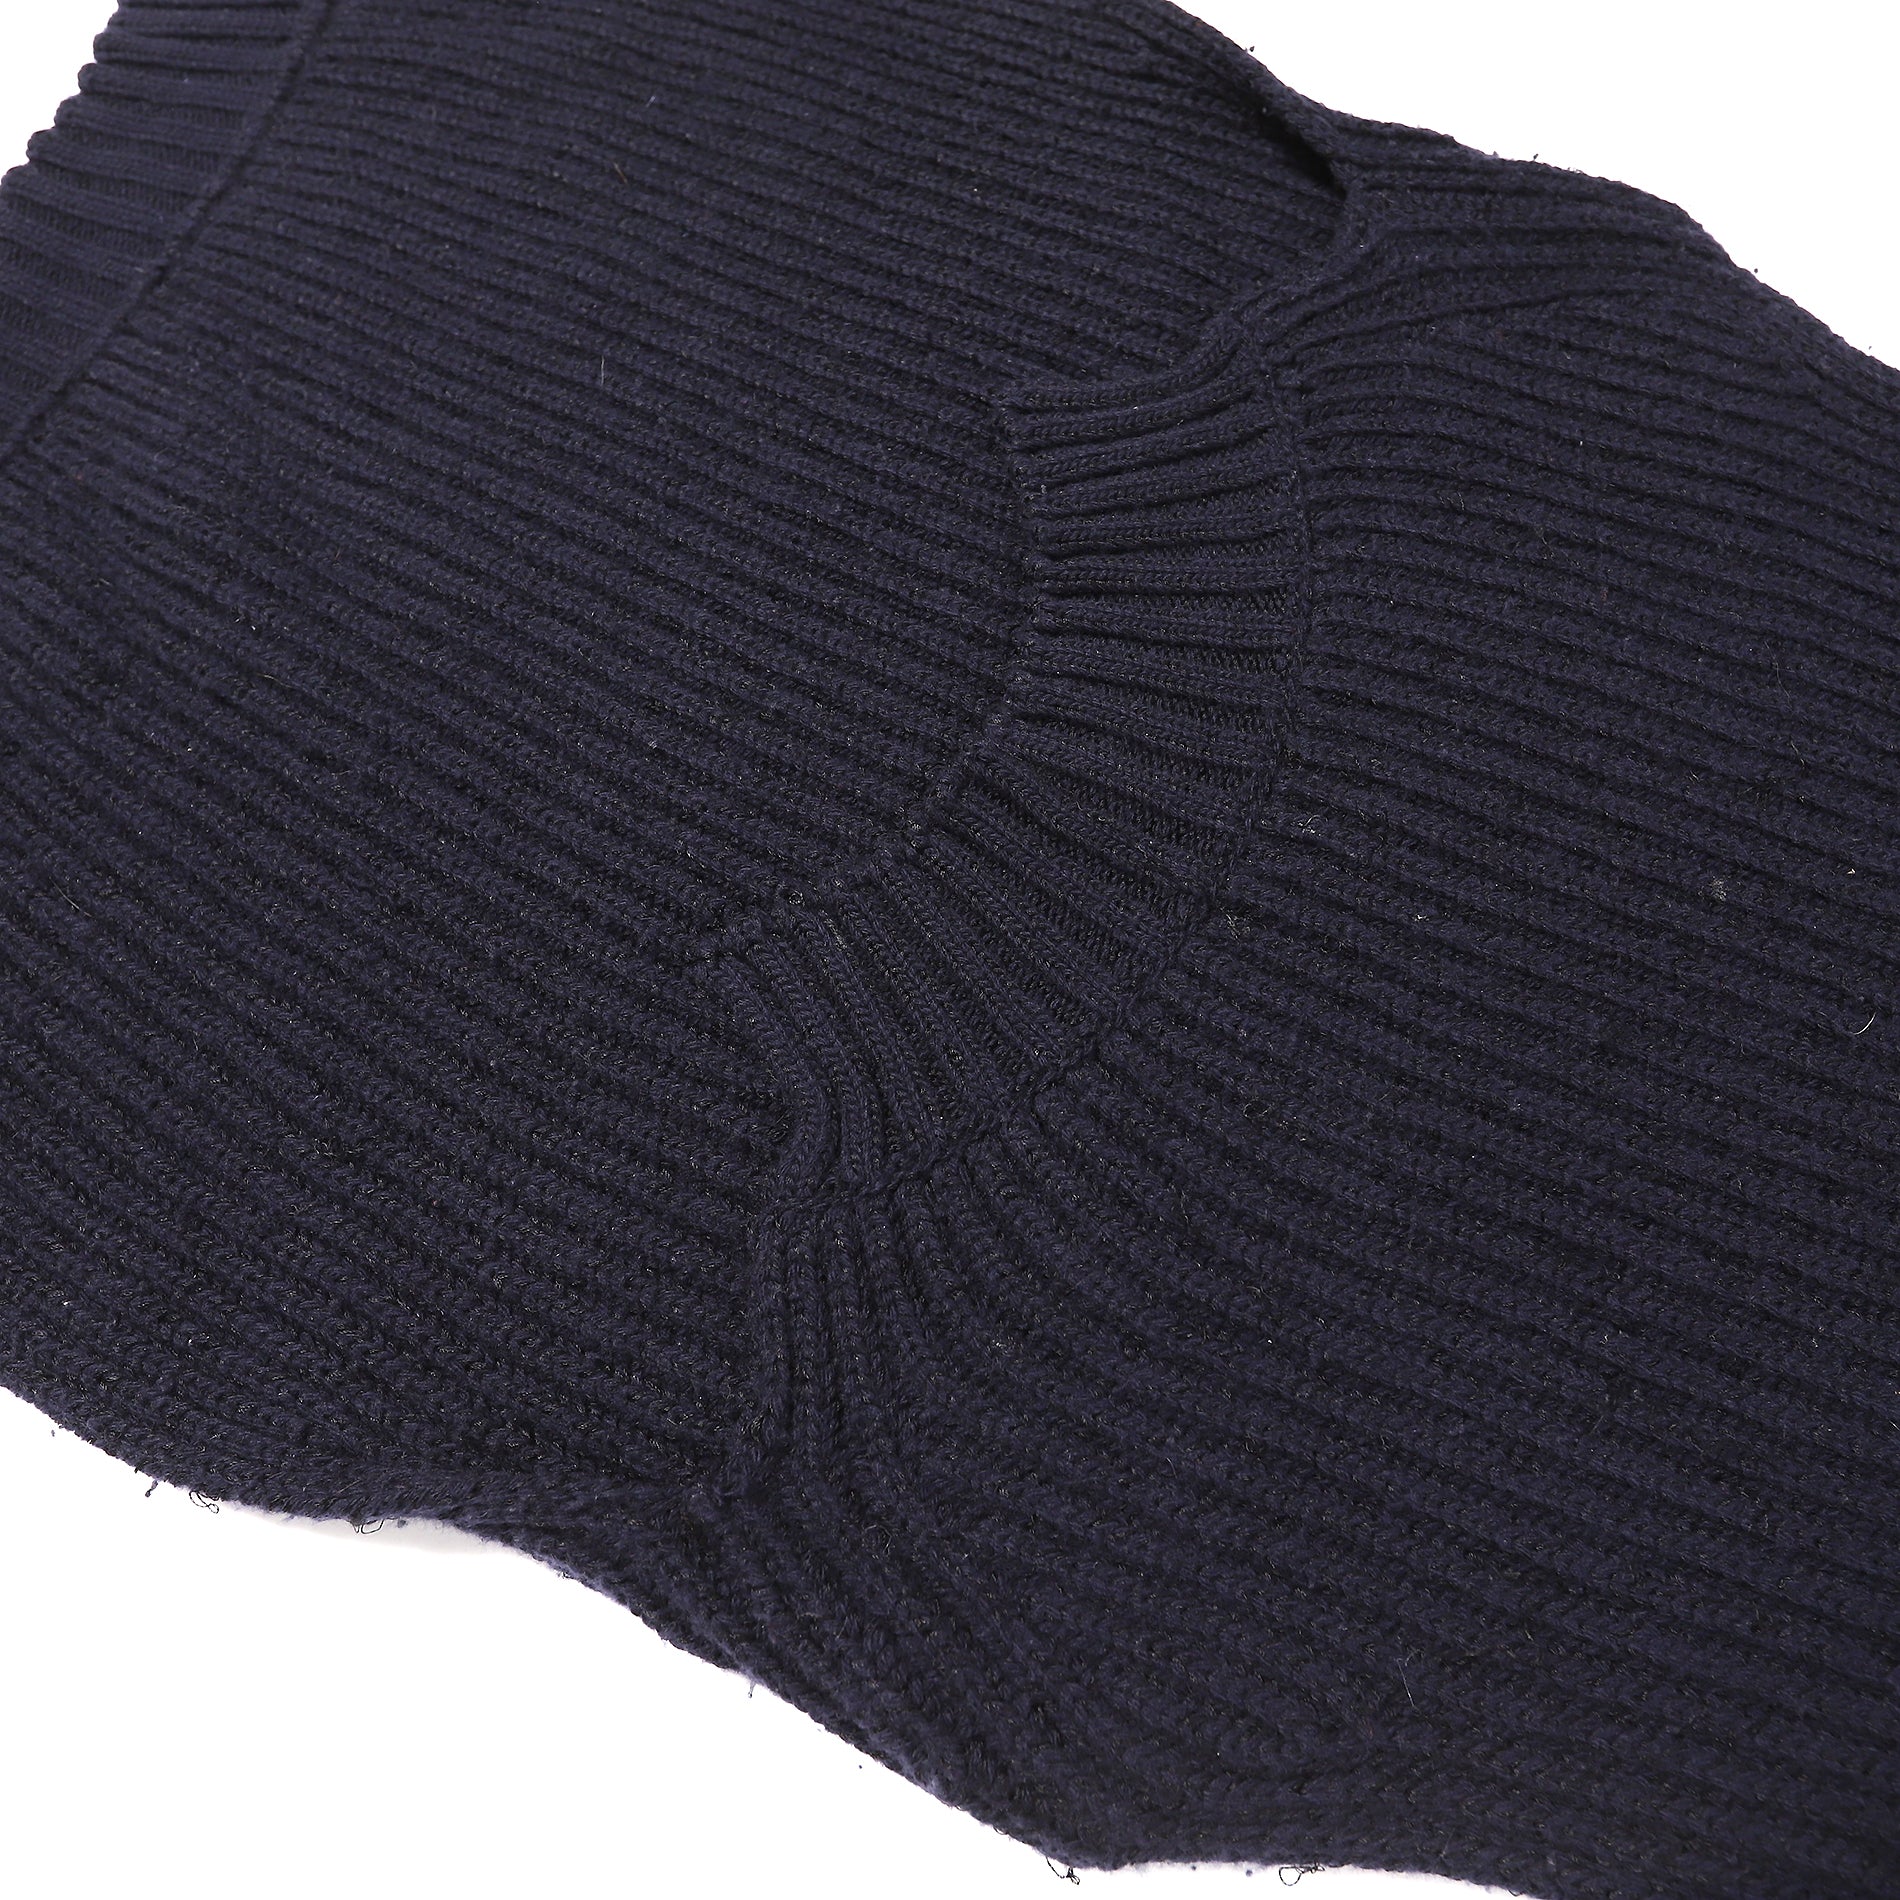 Céline by Phoebe Philo Deconstructed Knit Sweater